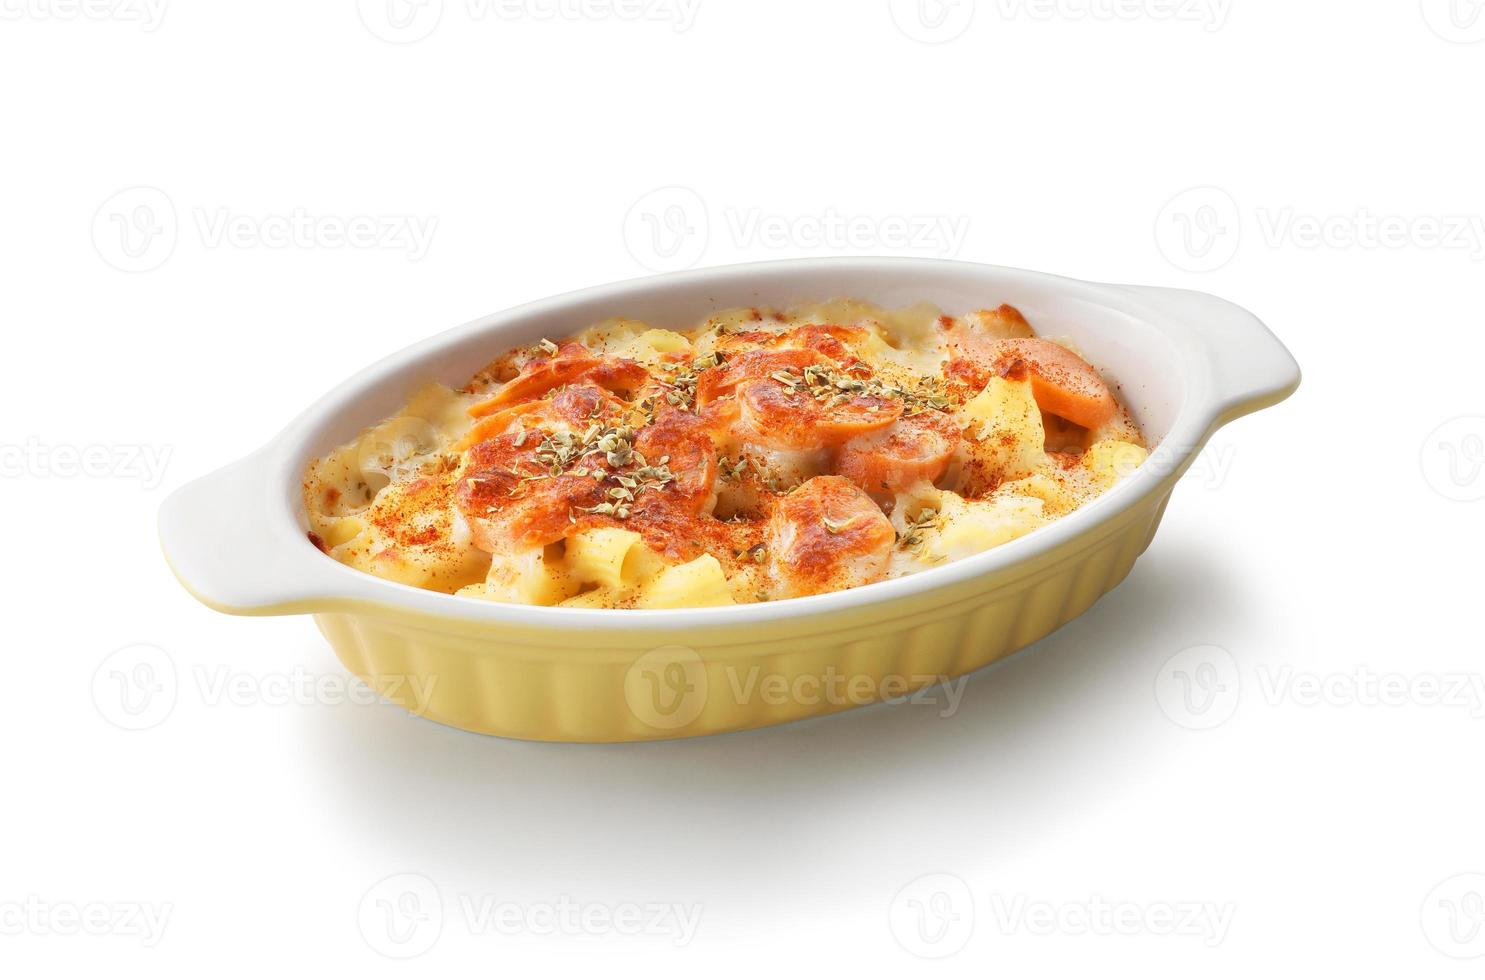 Baked Macaroni and Cheese with sausage. photo